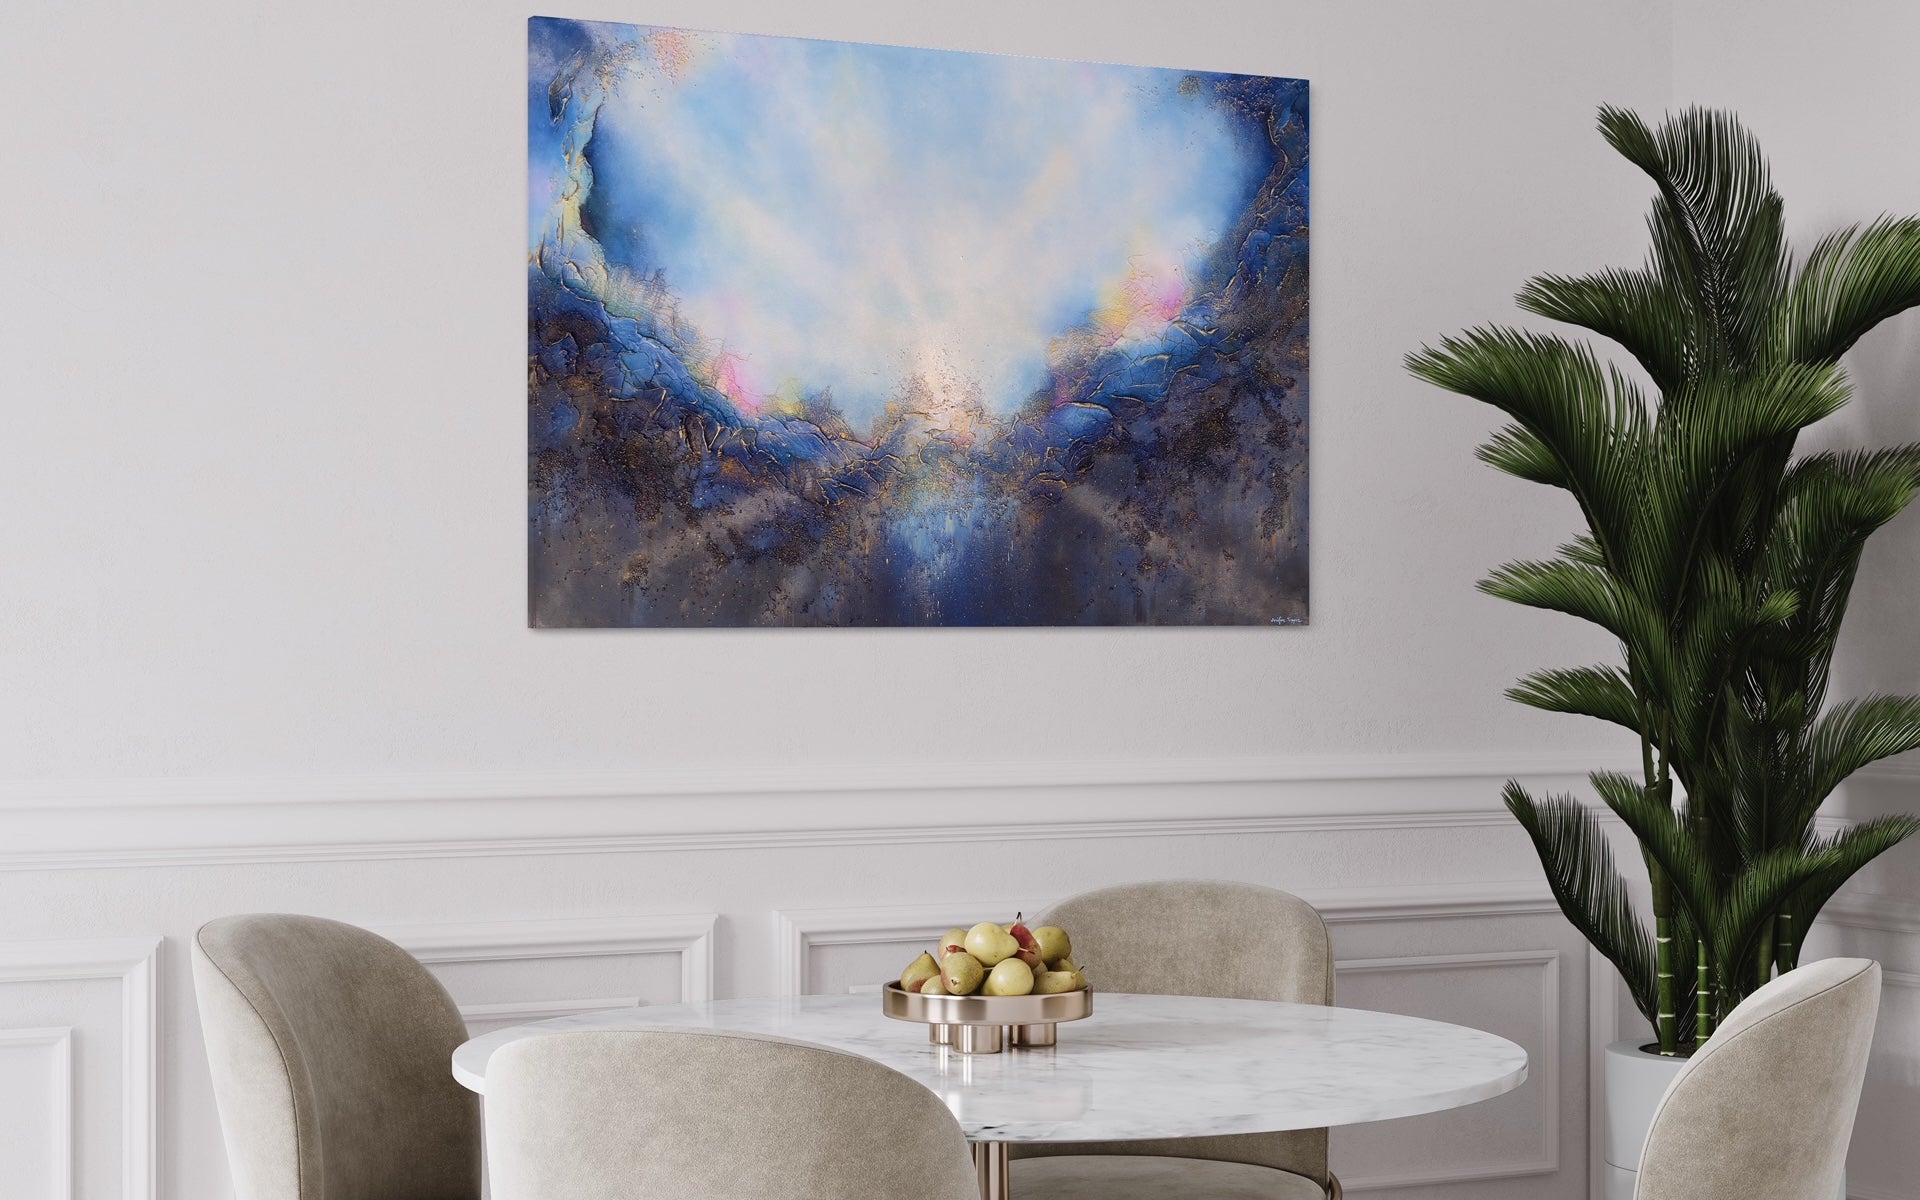 Soul's Return, hanging over a white table in a dining room with white walls, wainscotting, and deep green plants. a textured painting with light rays shining out from the center representing the soul's return to one's self, or the universe. Blue, pink, white, dark blue, textured painting. Ephemeral art, art with meaning, soul artist. Jennifer Tepper Fine Art.